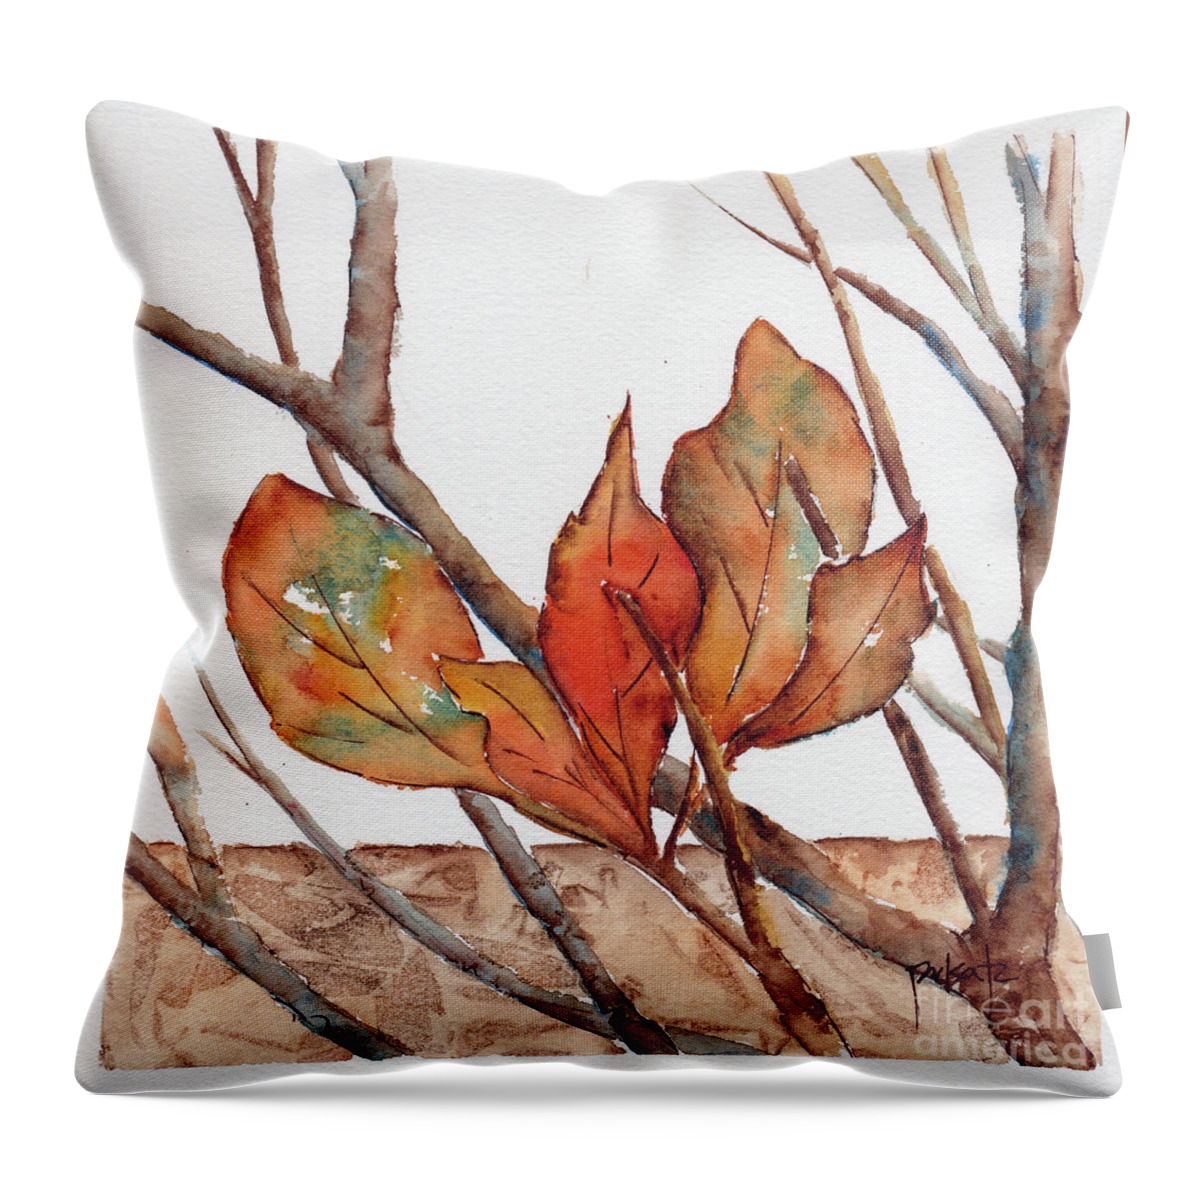 Impressionism Throw Pillow featuring the painting Autumn Leaves Amongst The Twigs by Pat Katz